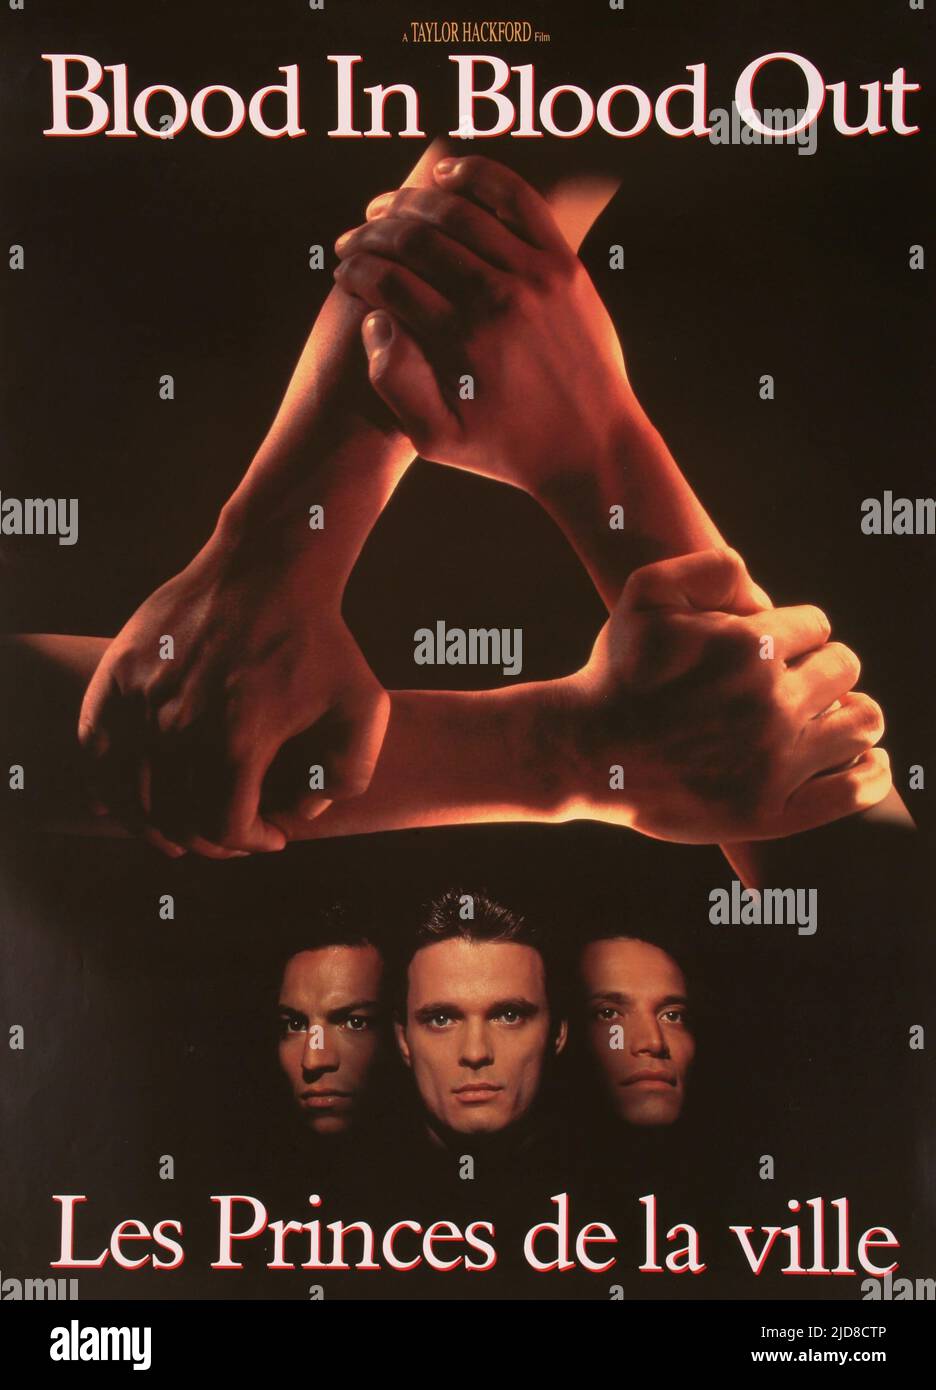 FILM POSTER, BLOOD IN BLOOD OUT, 1993 Stock Photo